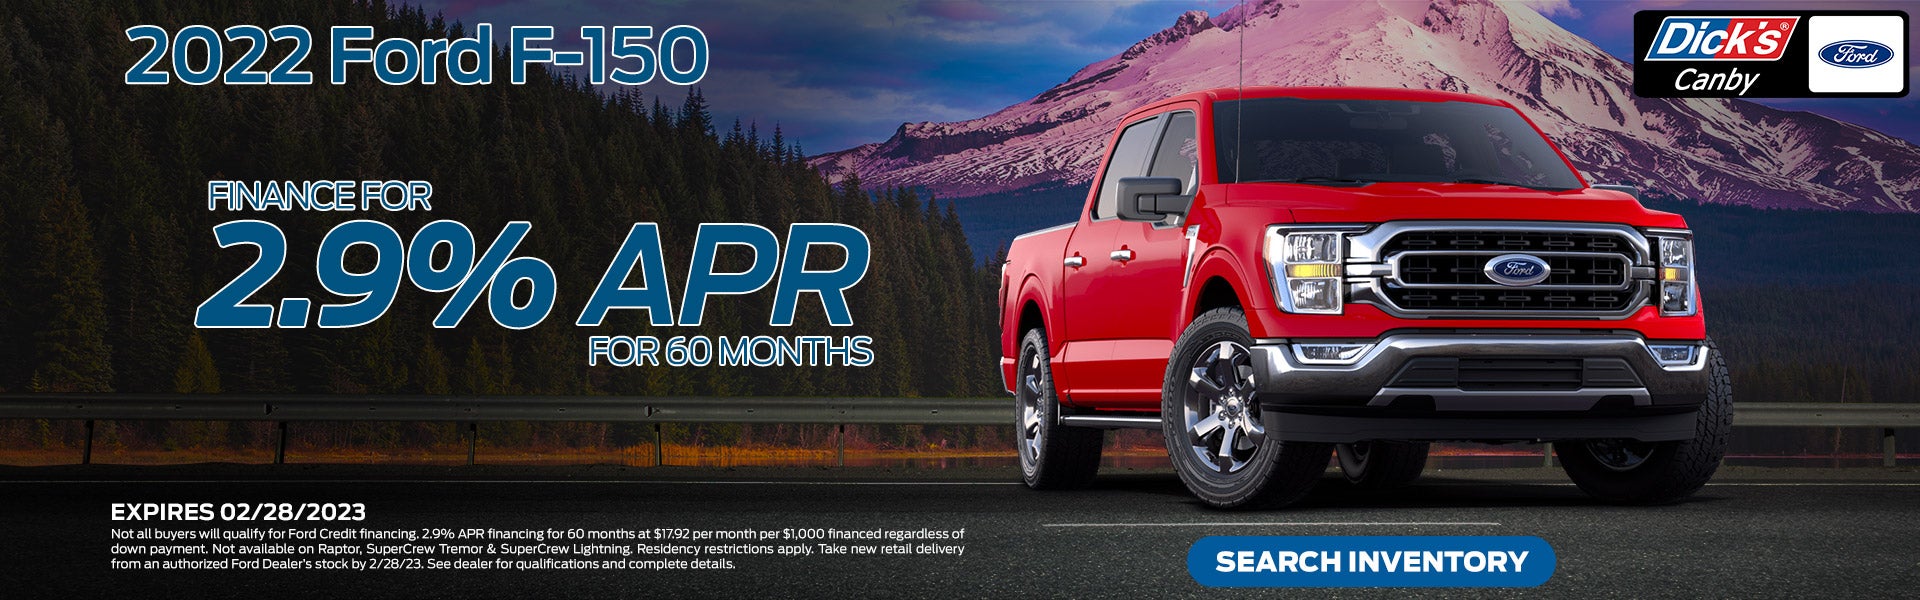 Ford Dealership in Canby OR | Serving Canby and Aurora | Dick's Canby Ford